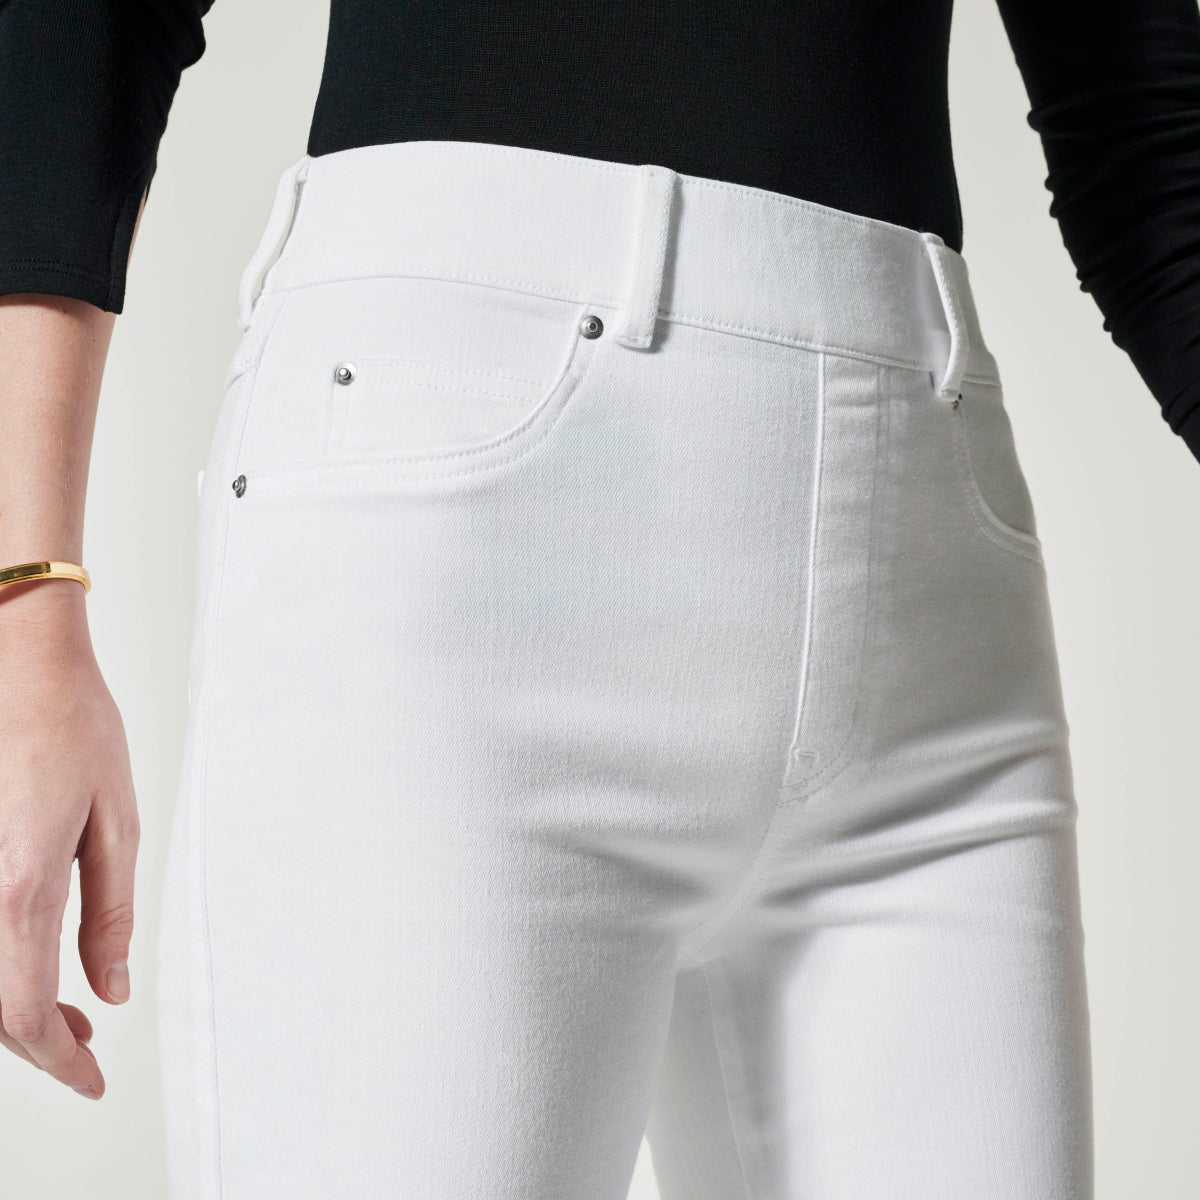 Spanx's Famous Non-Transparent White Pants Now Come in a